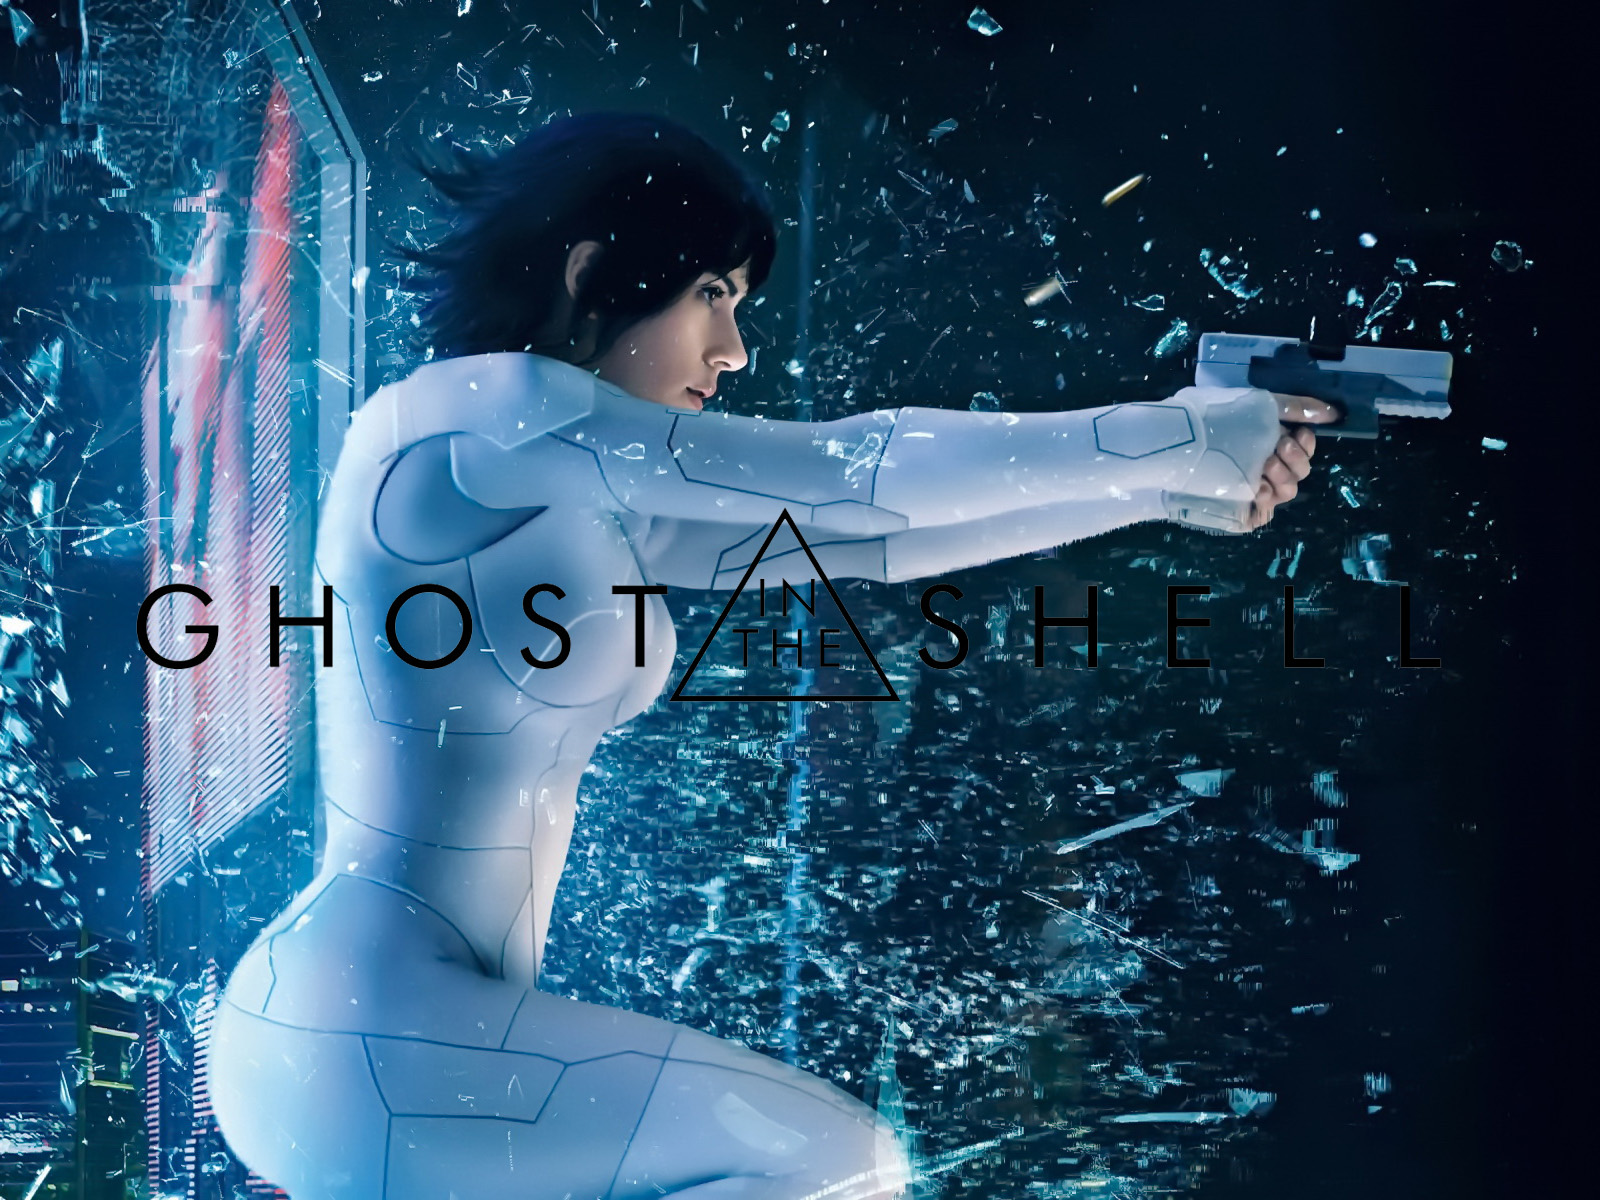 GHOST IN THE SHELL / ゴースト・イン・ザ・シェル Blu-ray&DVD Launch